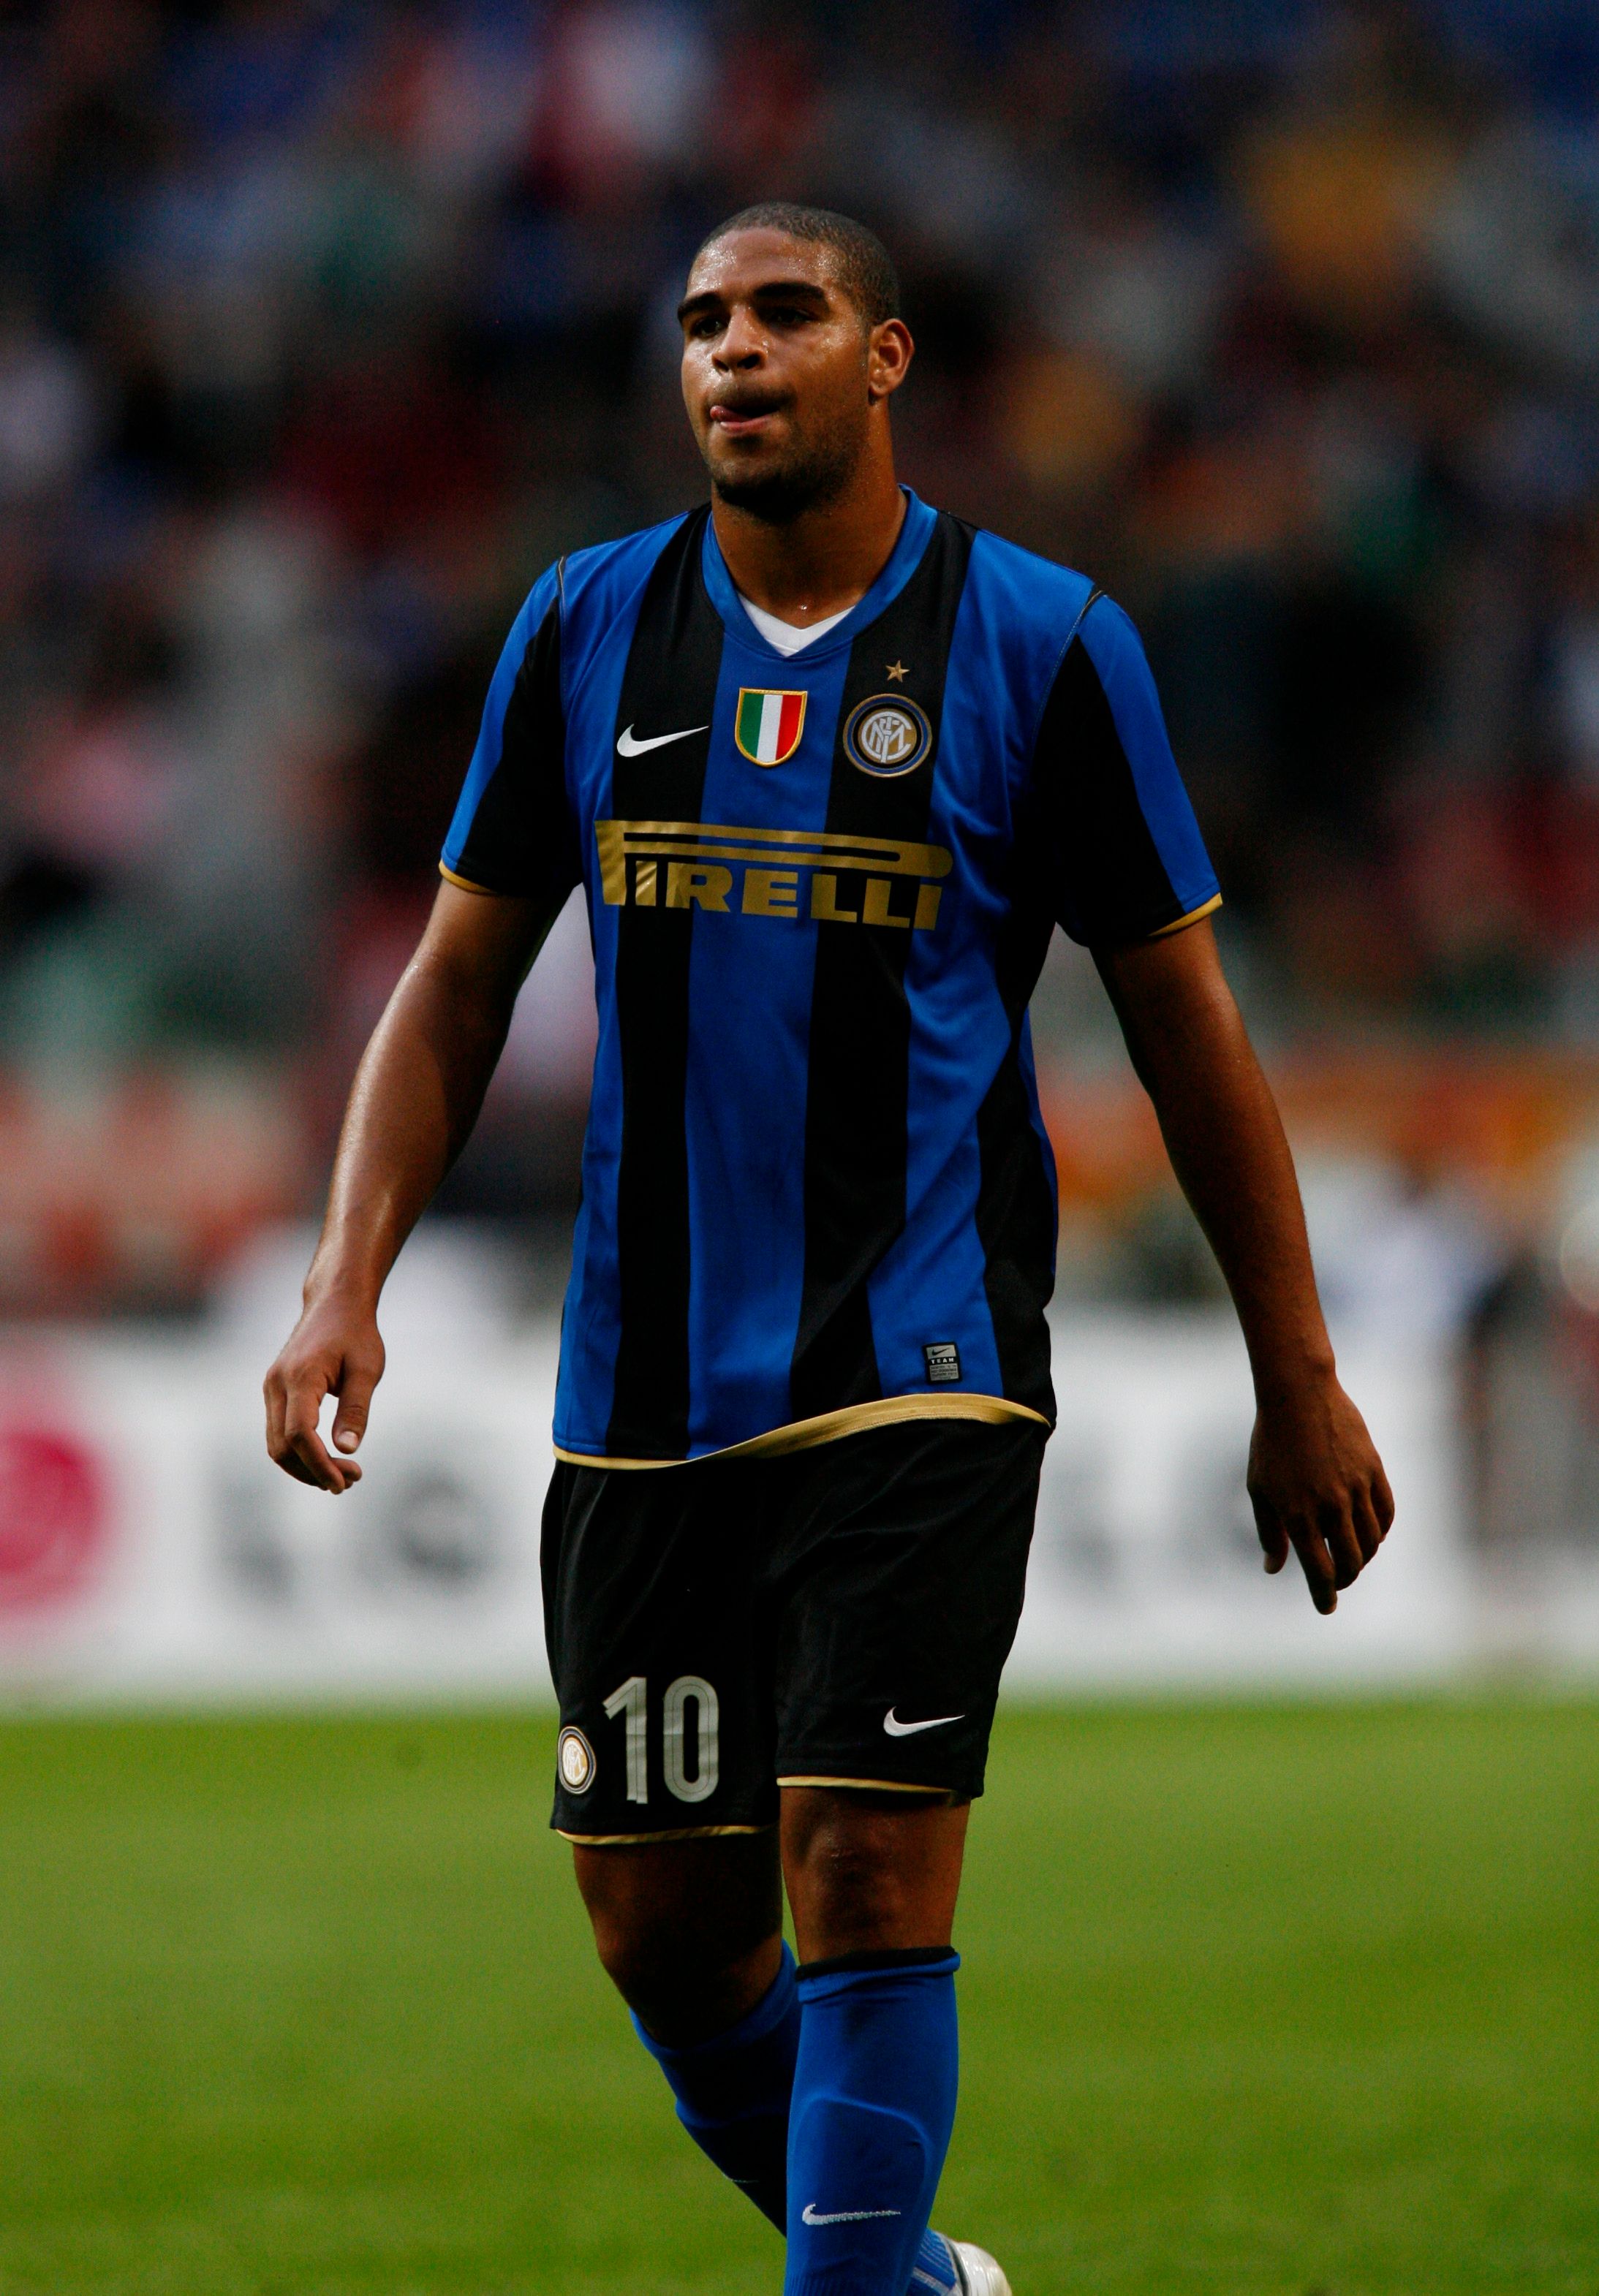 Adriano playing for Inter Milan.